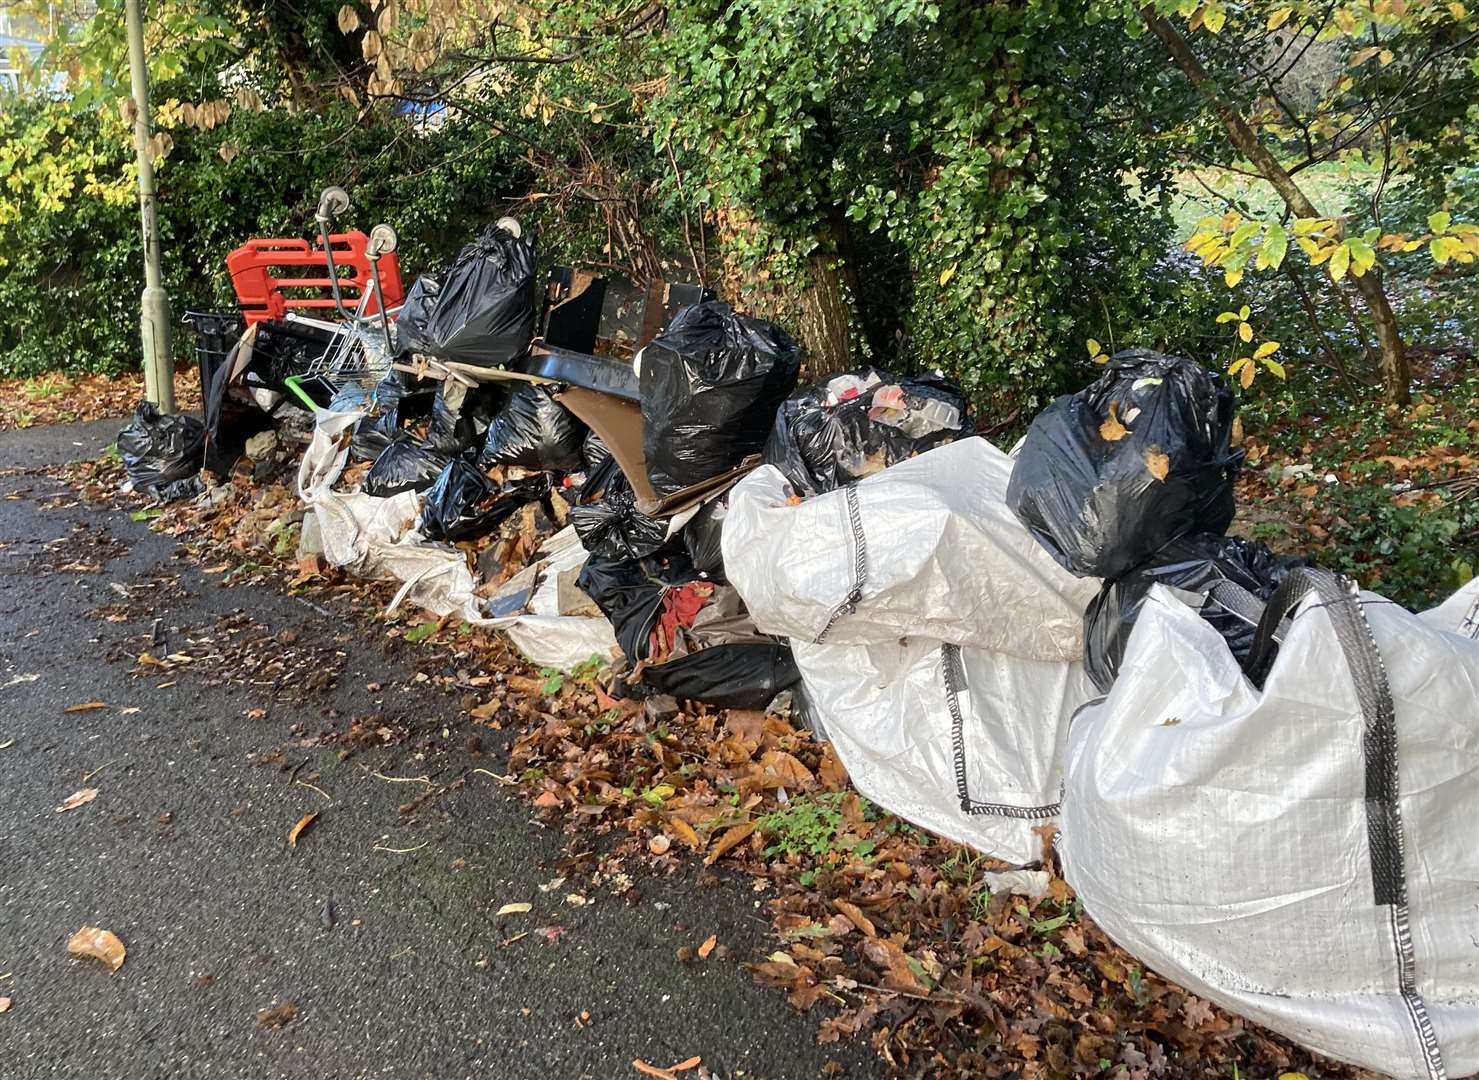 Waste fly-tipped in woods near Hales Place, Canterbury, that has been placed in an alley for the council to collect